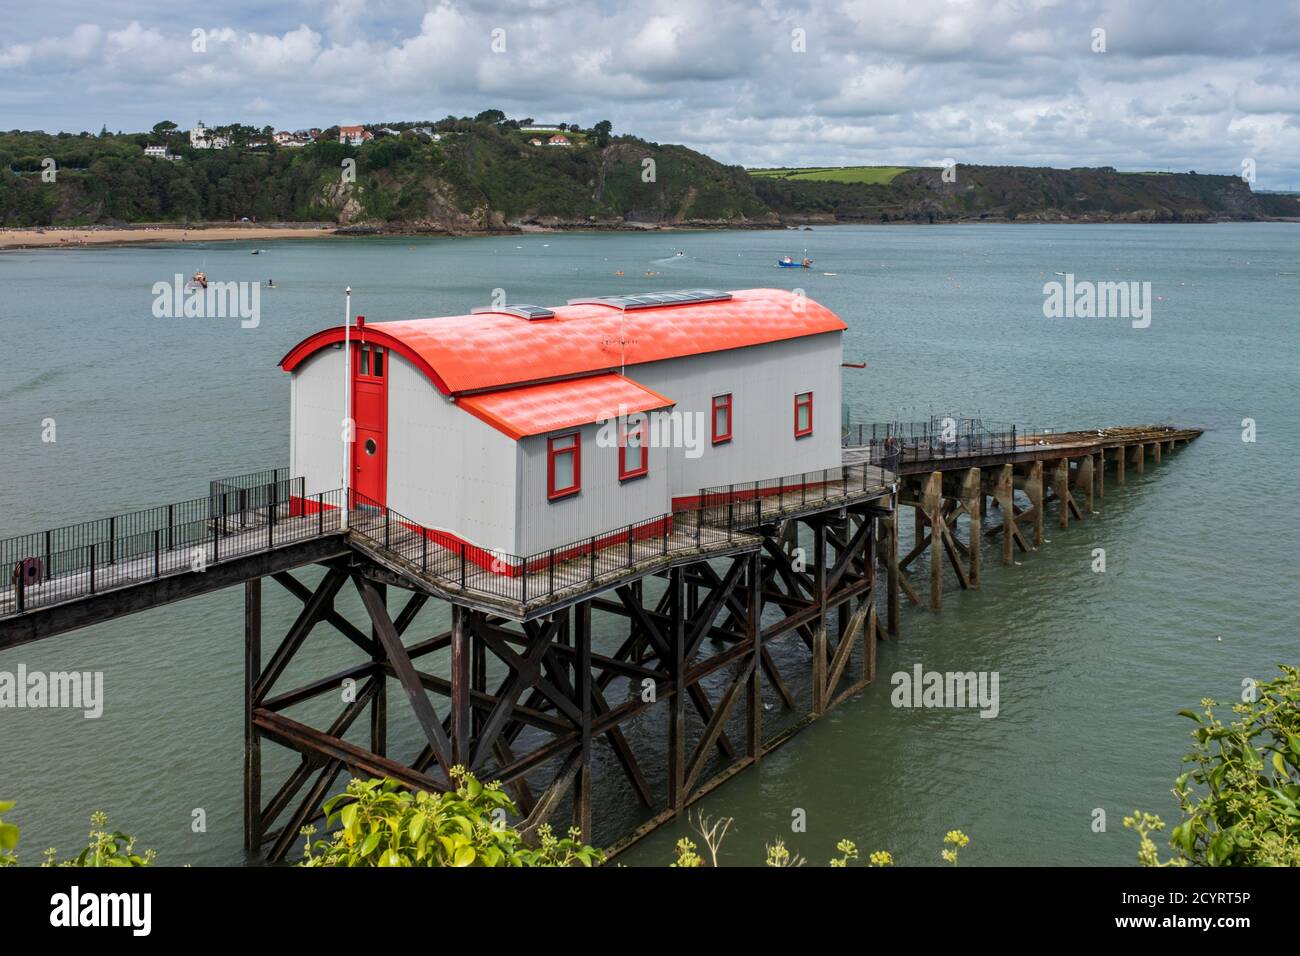 The old RNLI Lifeboat Station at Tenby in Pembrokeshire South Wales UK, built in 1905 and now converted into a private residence Stock Photo